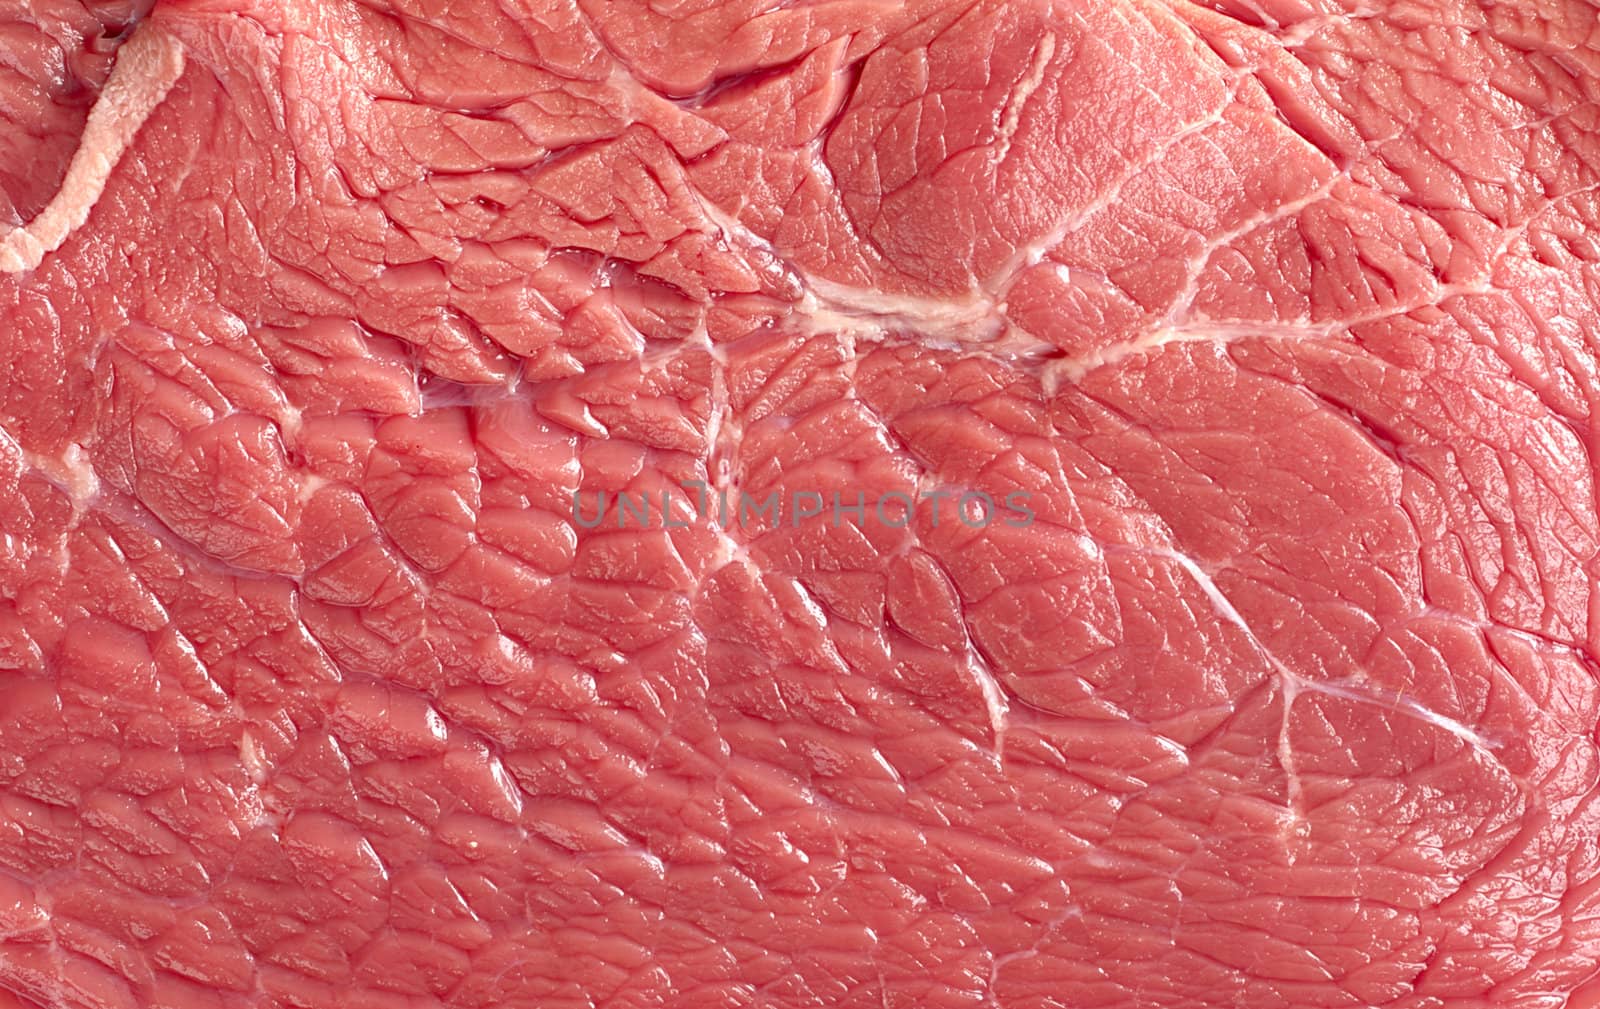 Texture and surface of fresh raw beef meat 